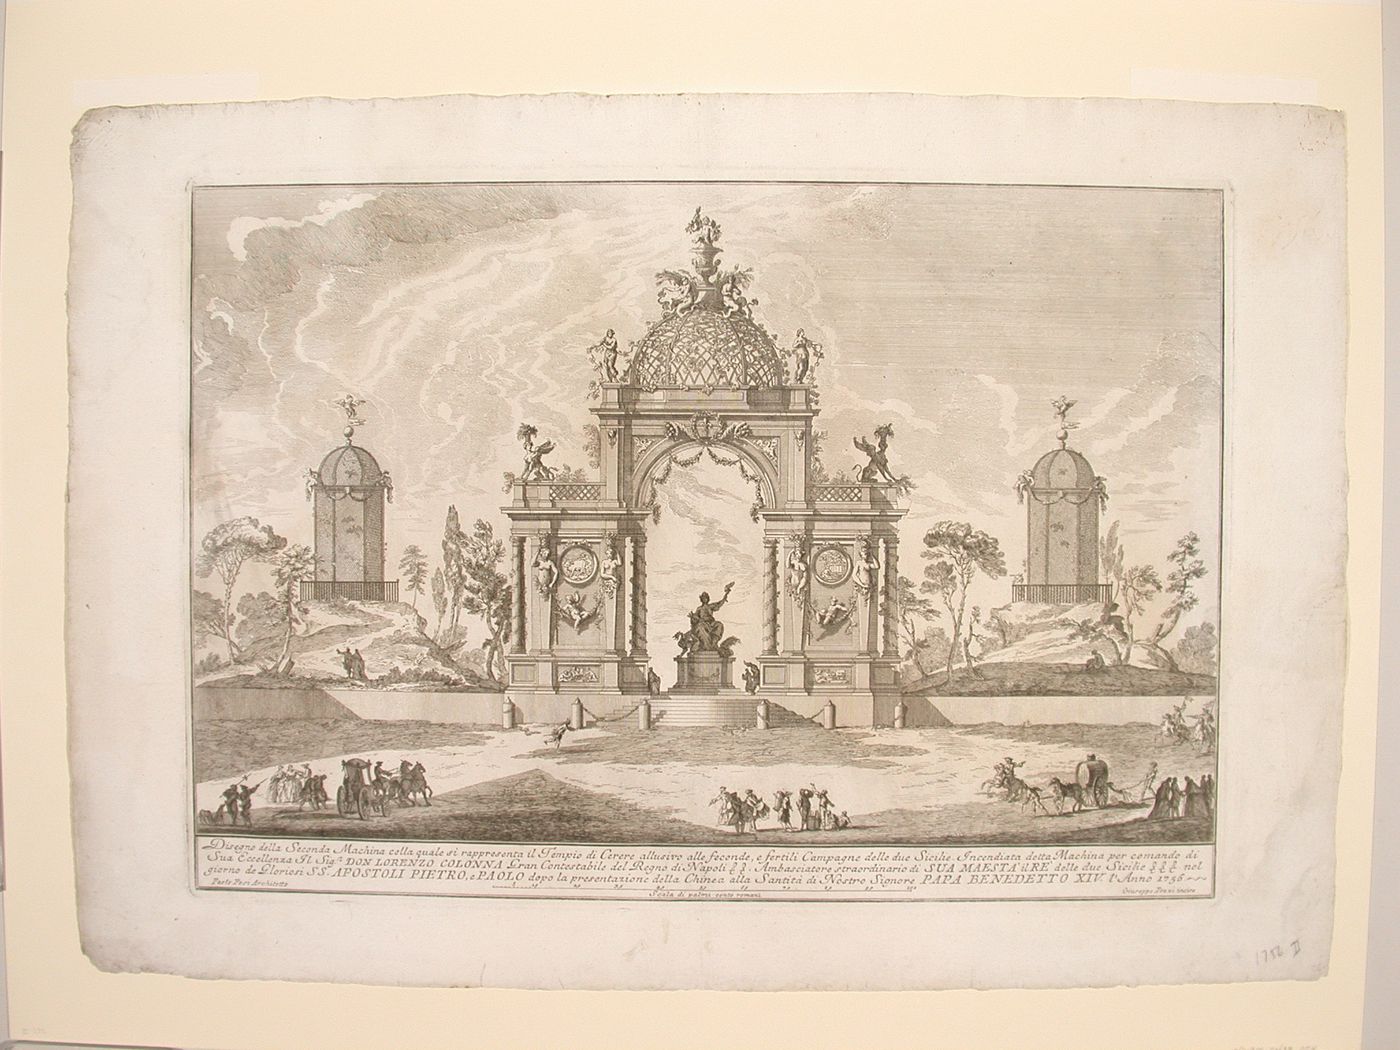 Etching of Posi's design for the "seconda macchina" of 1756